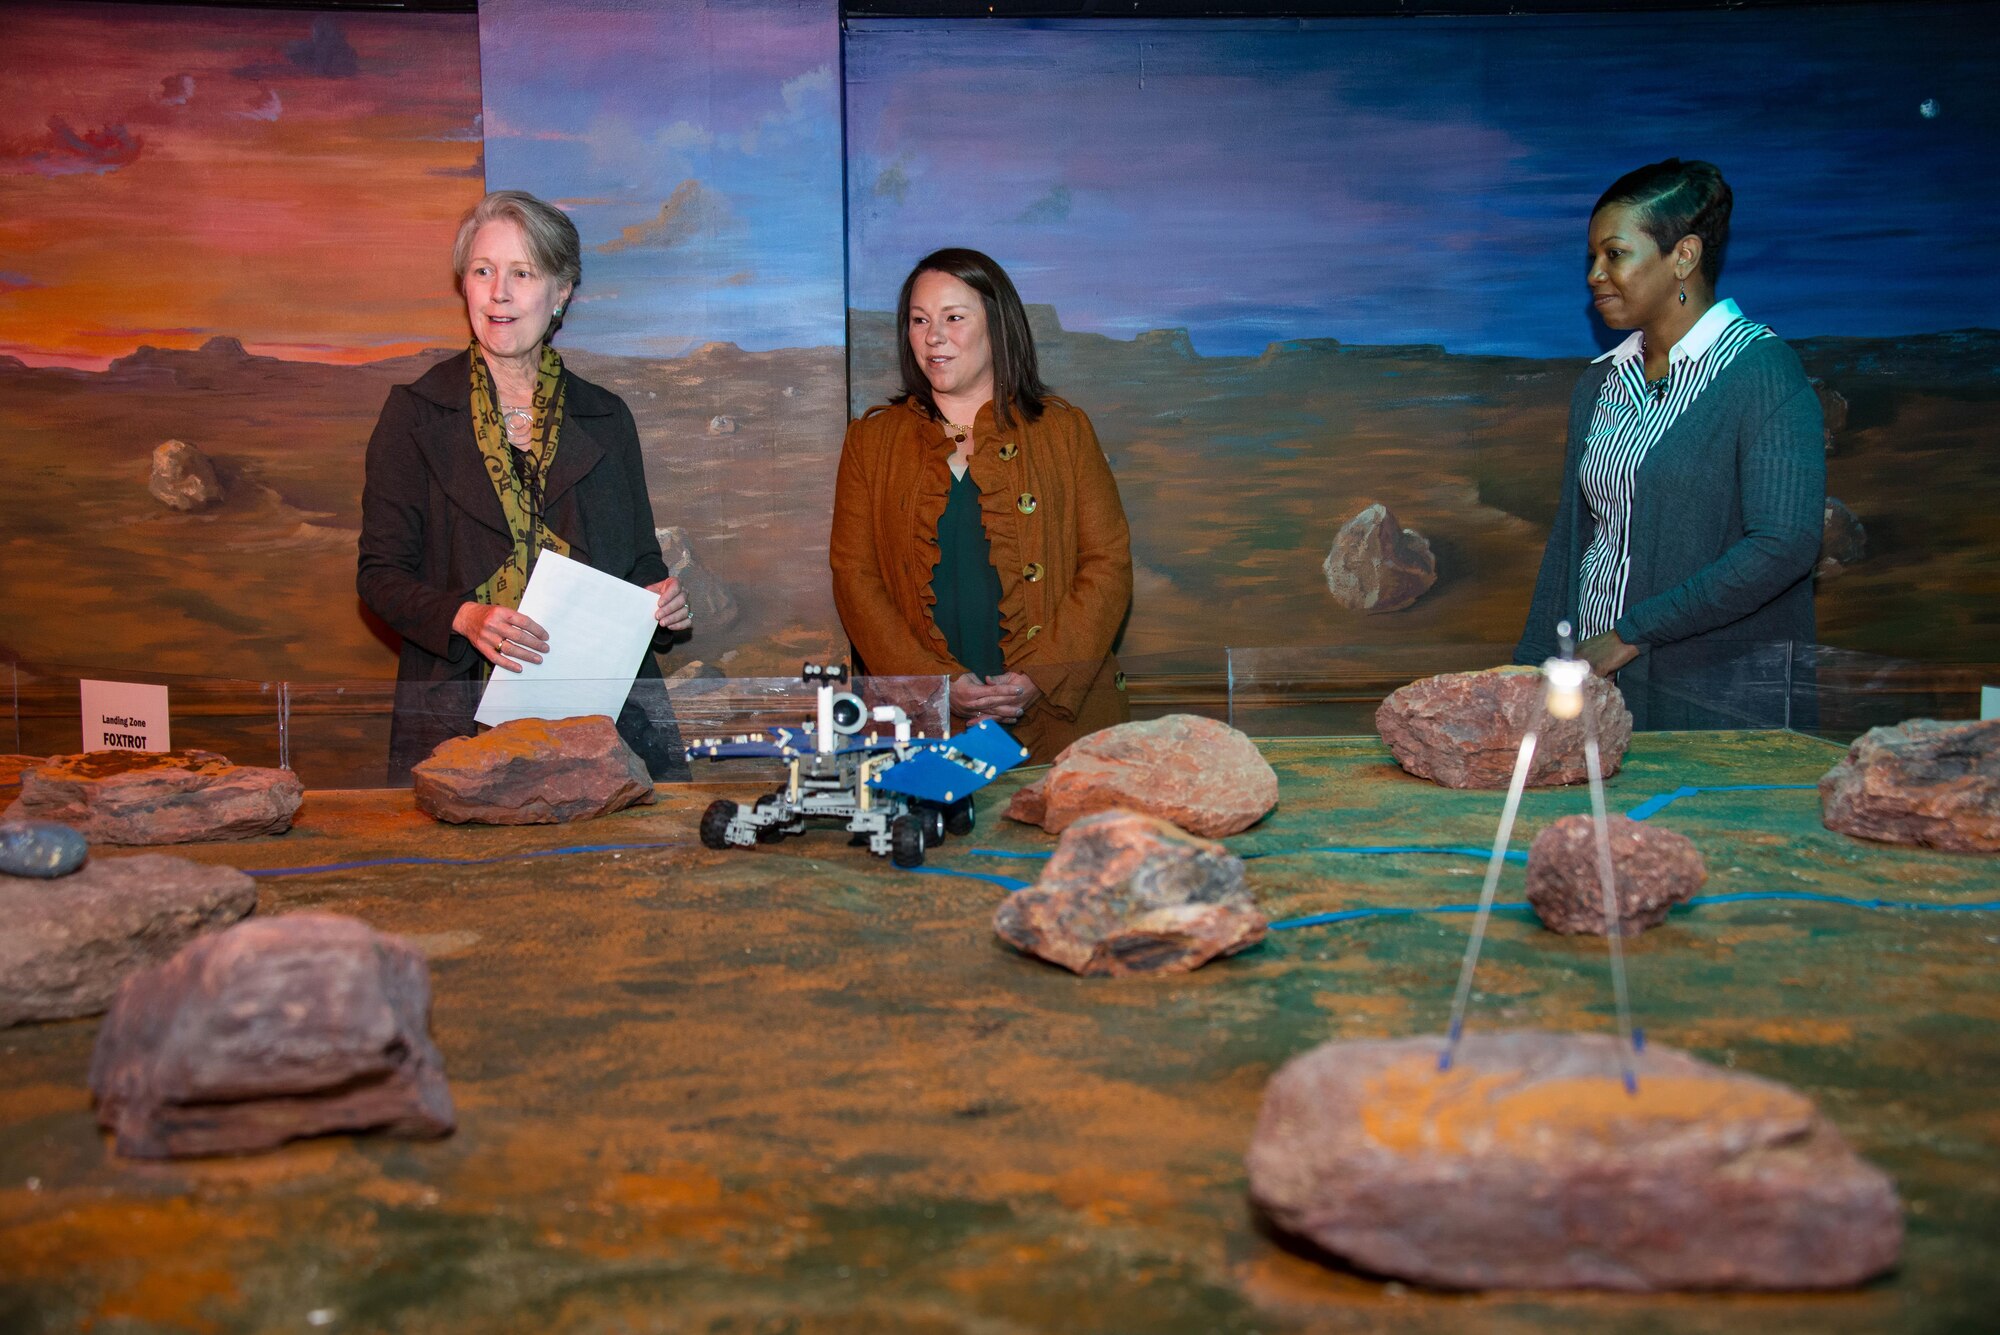 Ann Sikes, President of Montgomery Education Foundation, left, Congresswoman Martha Roby, U.S. Representative for Alabama’s Second Congressional District, center, and Princess Cuthrell, Department of Defense STARBASE Maxwell, tour the Mars Room during Roby’s first visit to STARBASE Maxwell, Nov. 27, 2017, Maxwell Air Force Base, Ala. Roby visited STARBASE Maxwell to become familiar with the program and the benefits it brings to the community. STARBASE Maxwell students use the Mars Room to build and test their robots. (U.S. Air Force photo by Melanie Rodgers Cox/Released.)